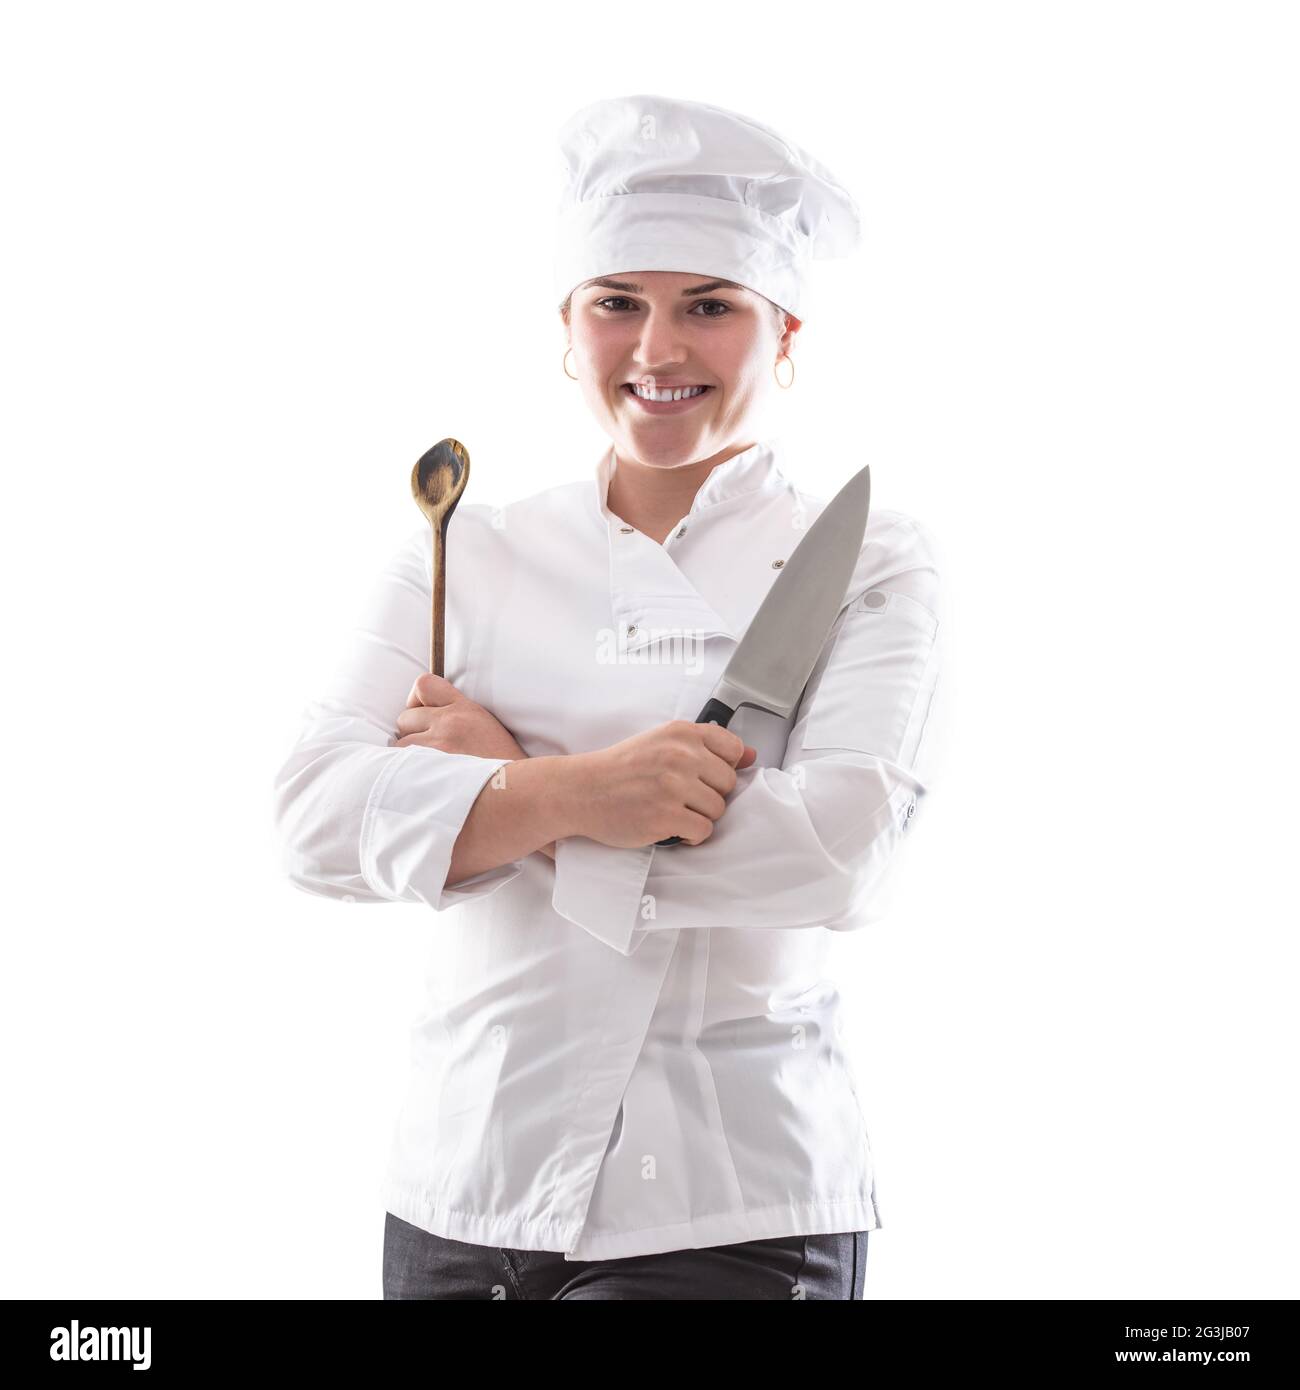 https://c8.alamy.com/comp/2G3JB07/isolated-chef-with-crossed-hands-holding-sharp-knife-and-wooden-spoon-2G3JB07.jpg